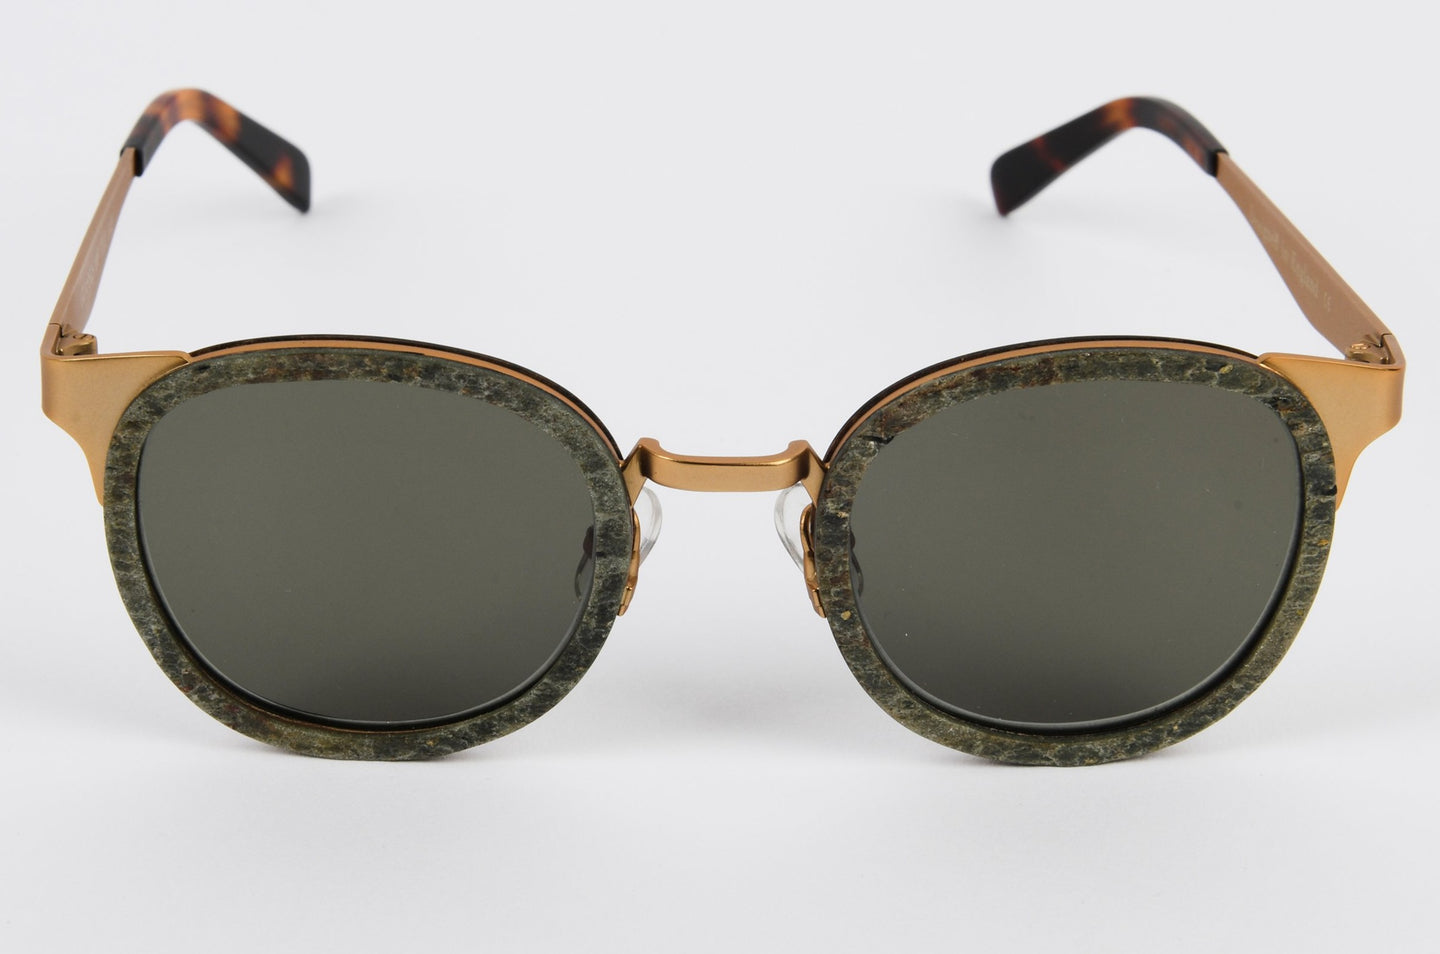 Fashion sunglasses with gold corners and wooden front 